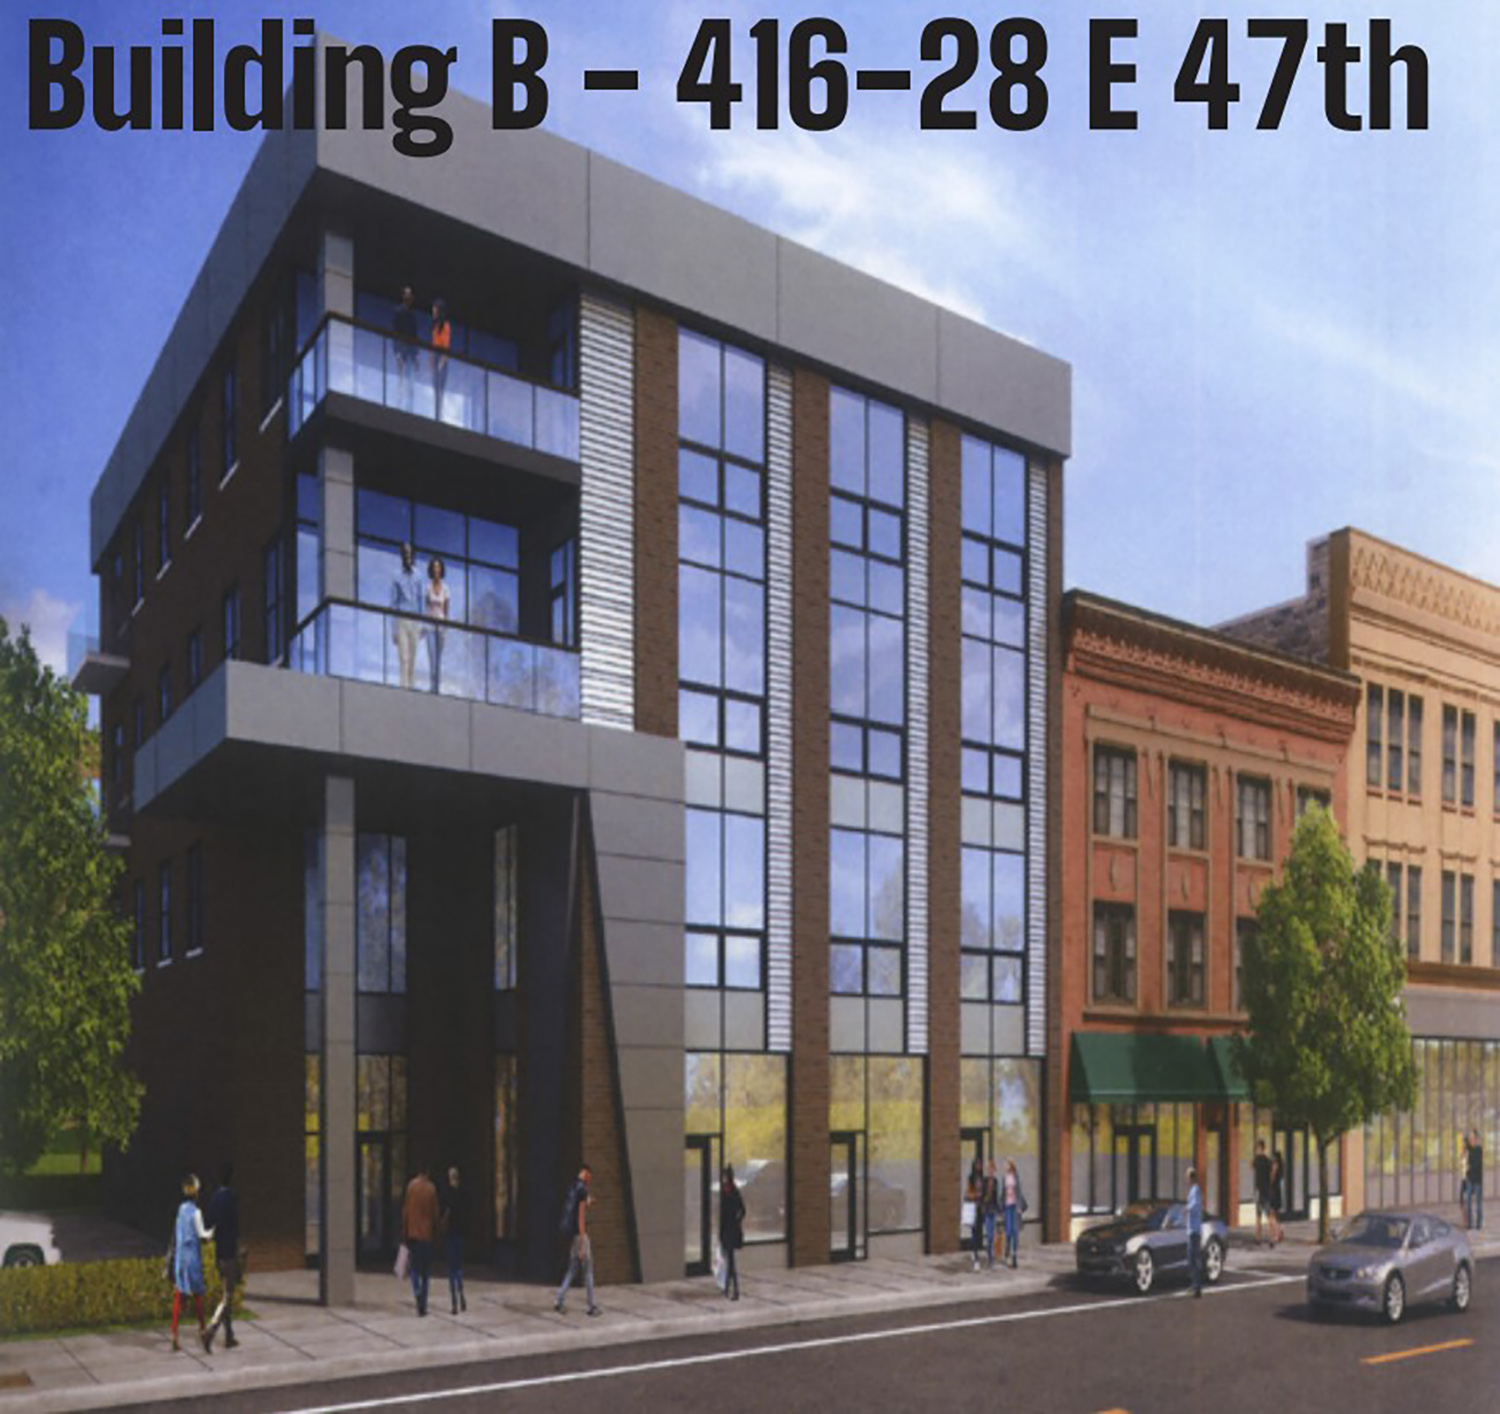 47th/Vincennes Partnership. Rendering by Brook Architecture, Revere Properties Architects, and Site Design Group